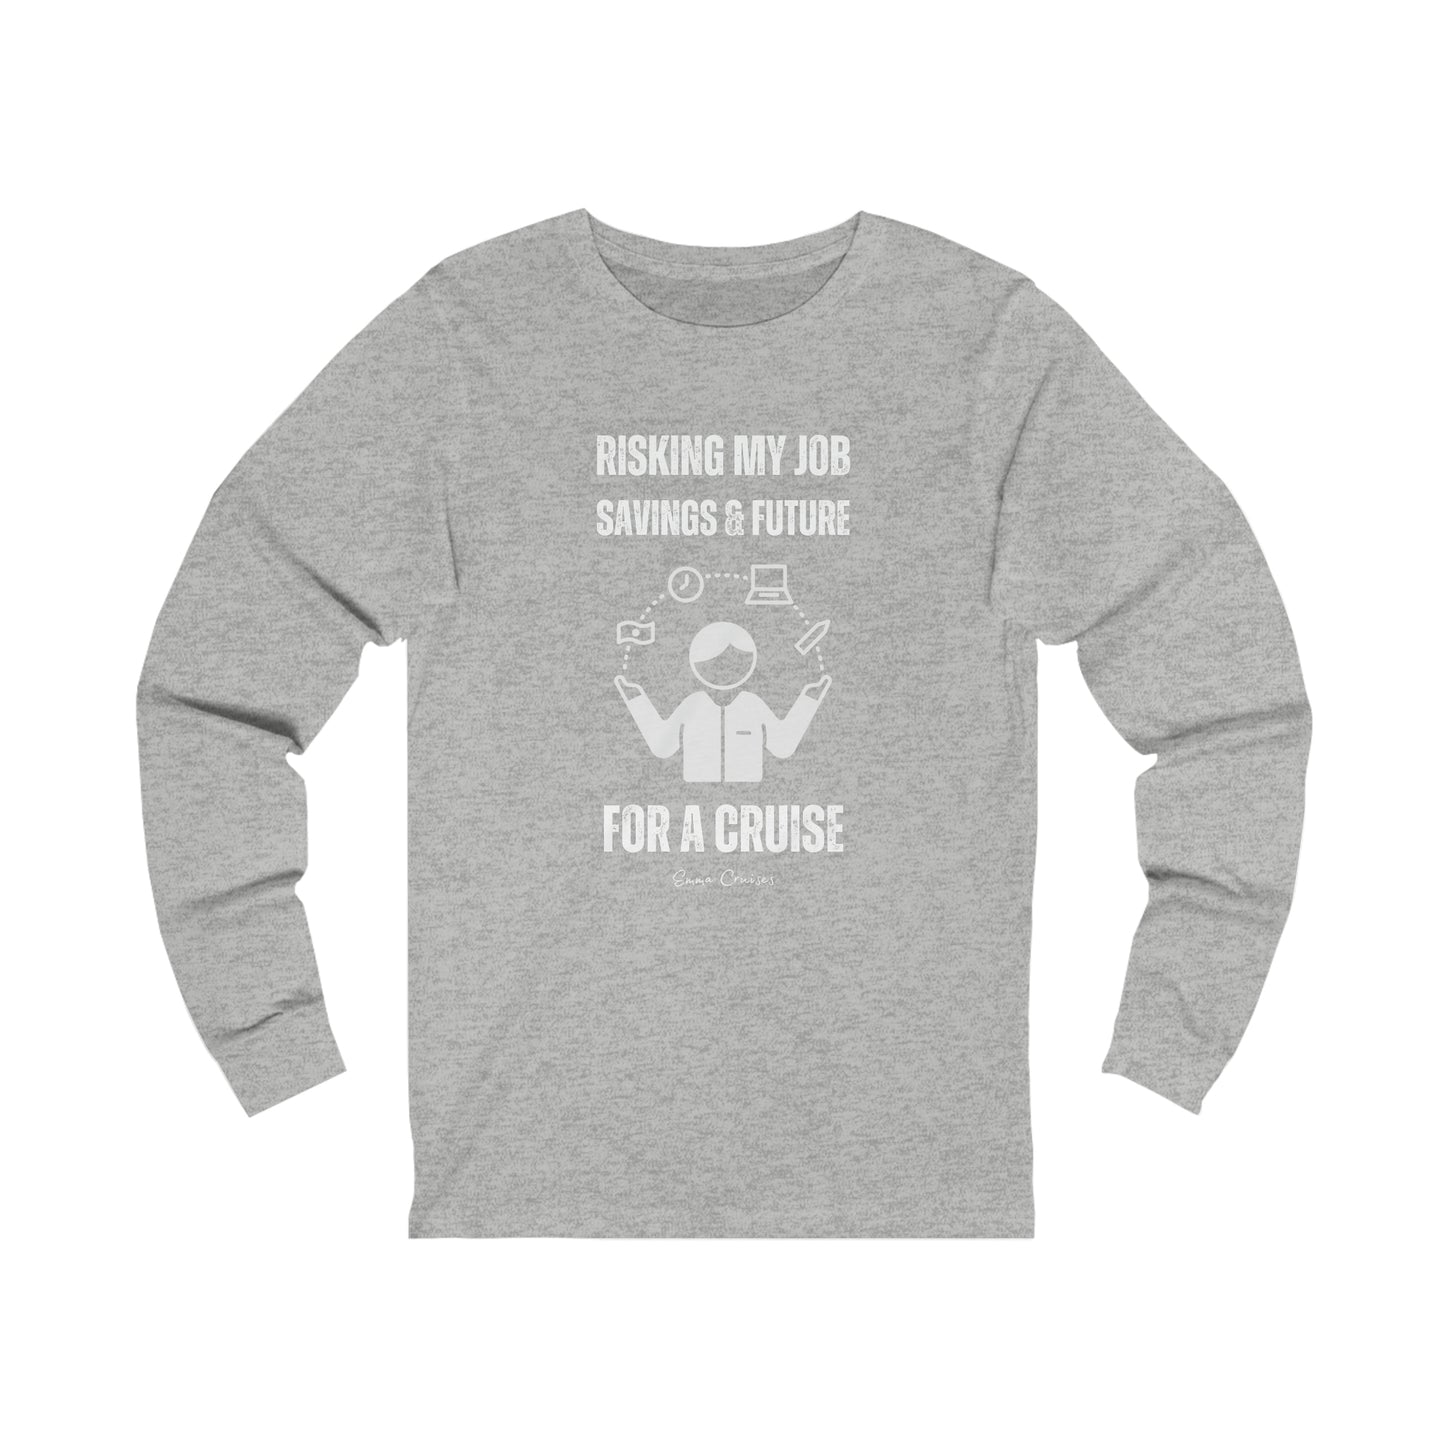 Risking Everything for a Cruise - UNISEX T-Shirt